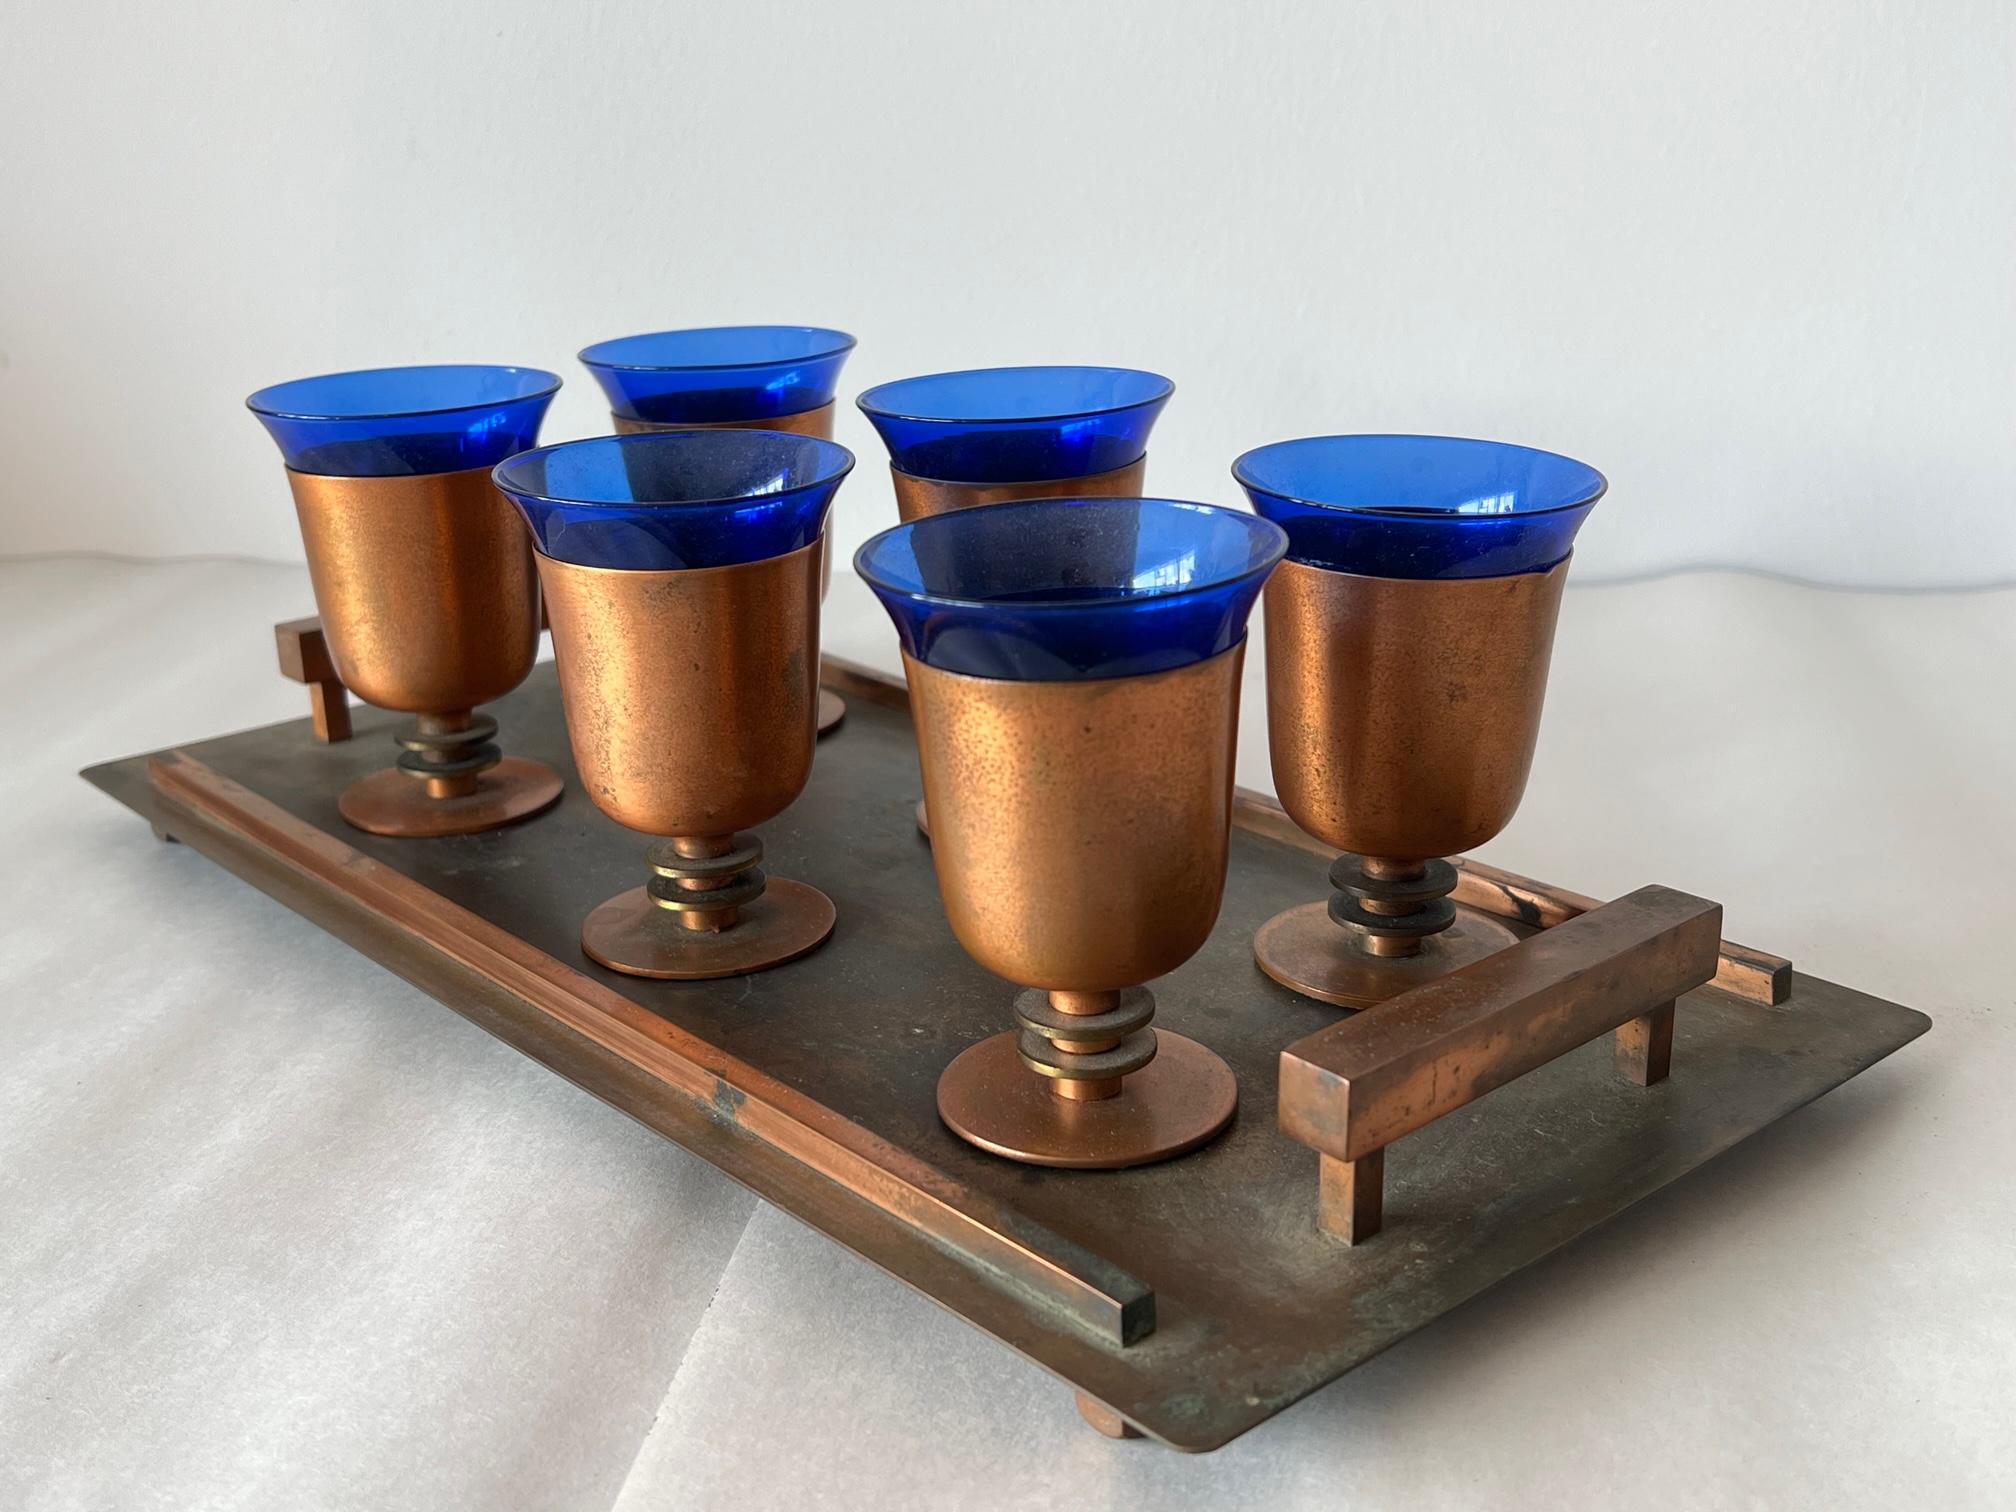 Original Art Deco tray with six matching drinking goblets. An excellent modernist design, heavy-well made, brass and copper, and cobalt glass.